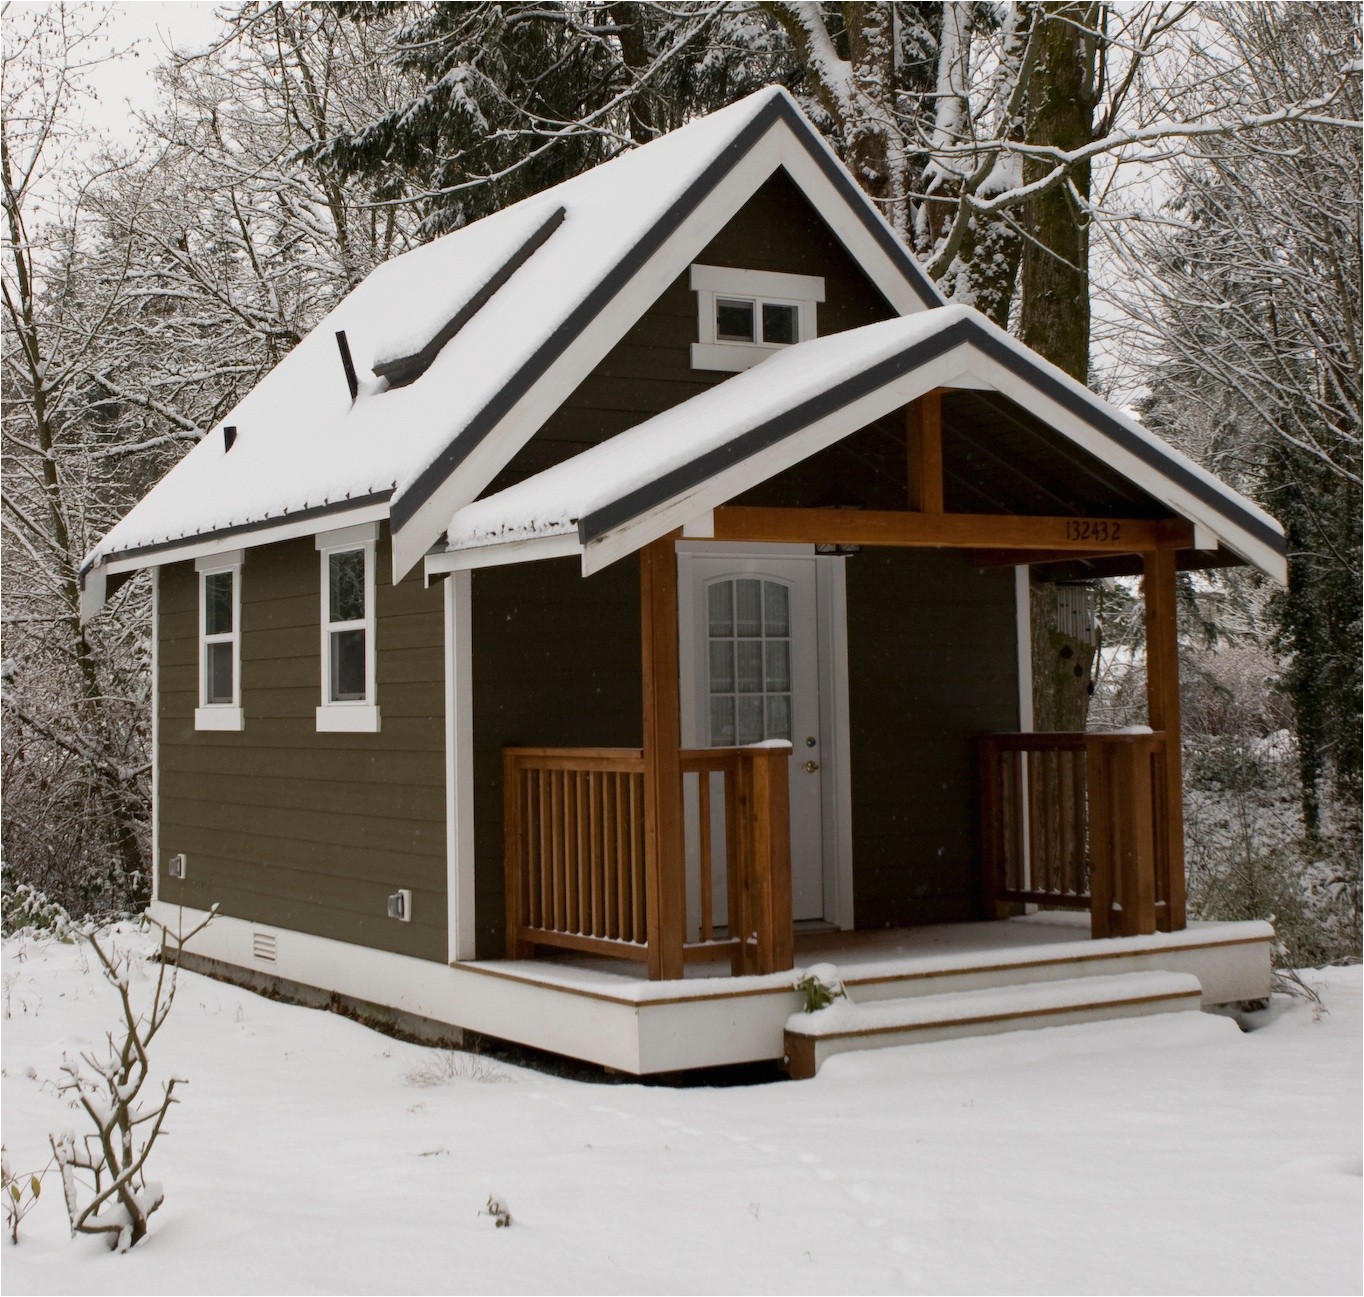 House Plans Small Homes the Tiny House Movement Part 1